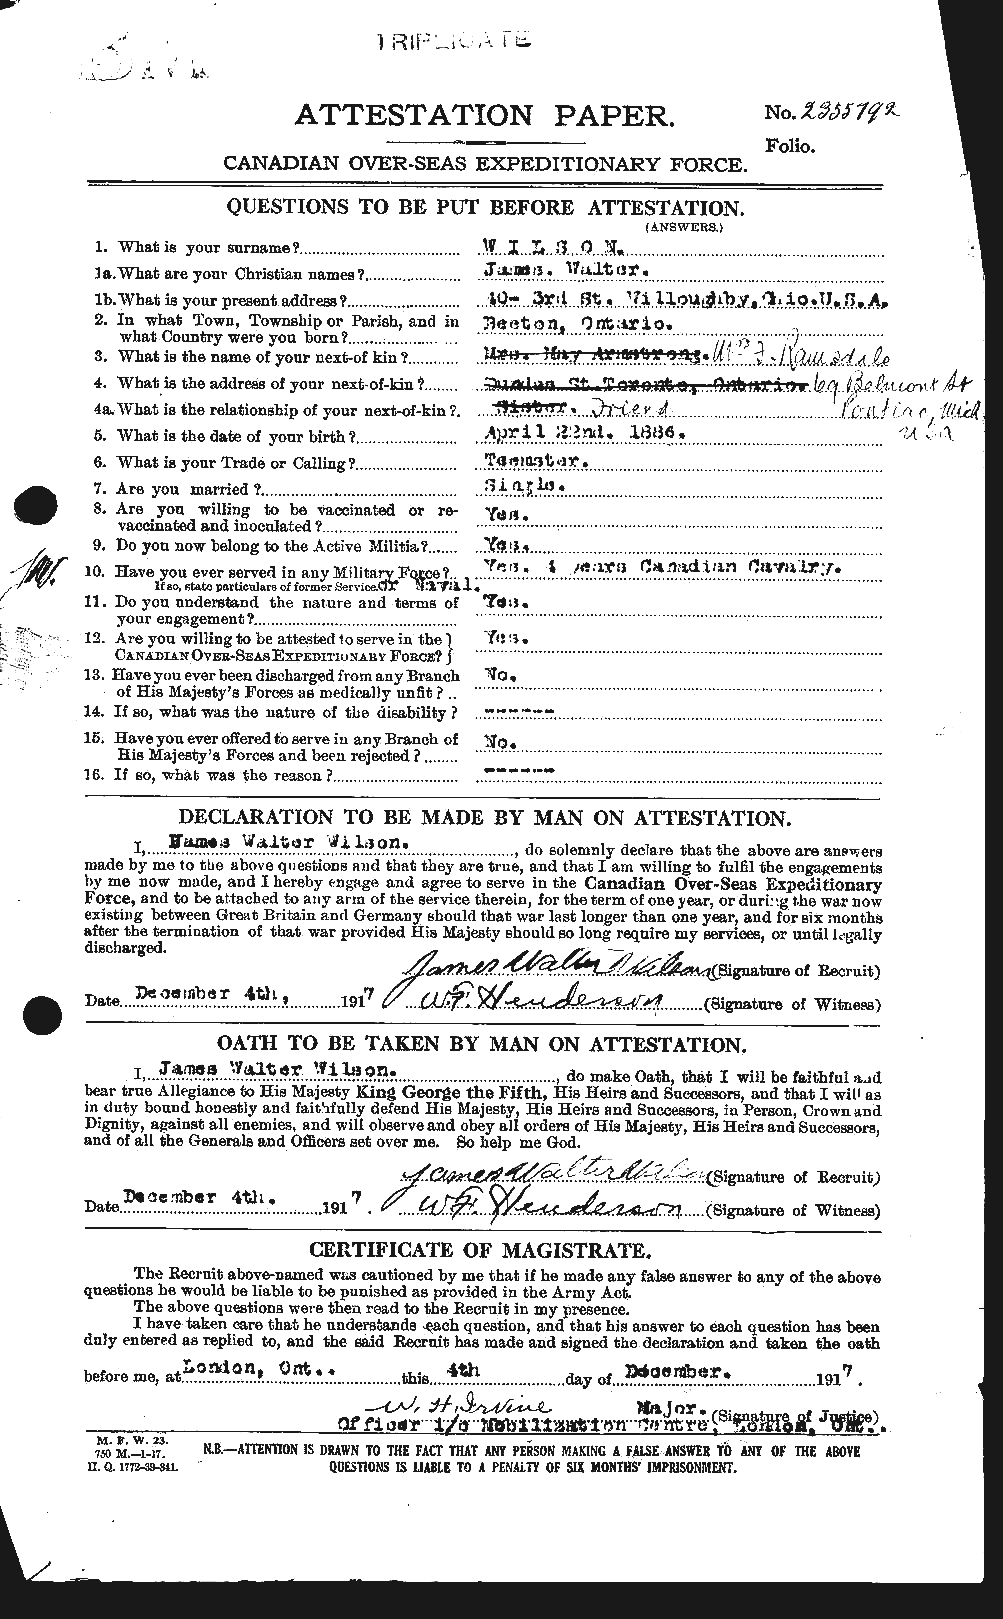 Personnel Records of the First World War - CEF 681505a